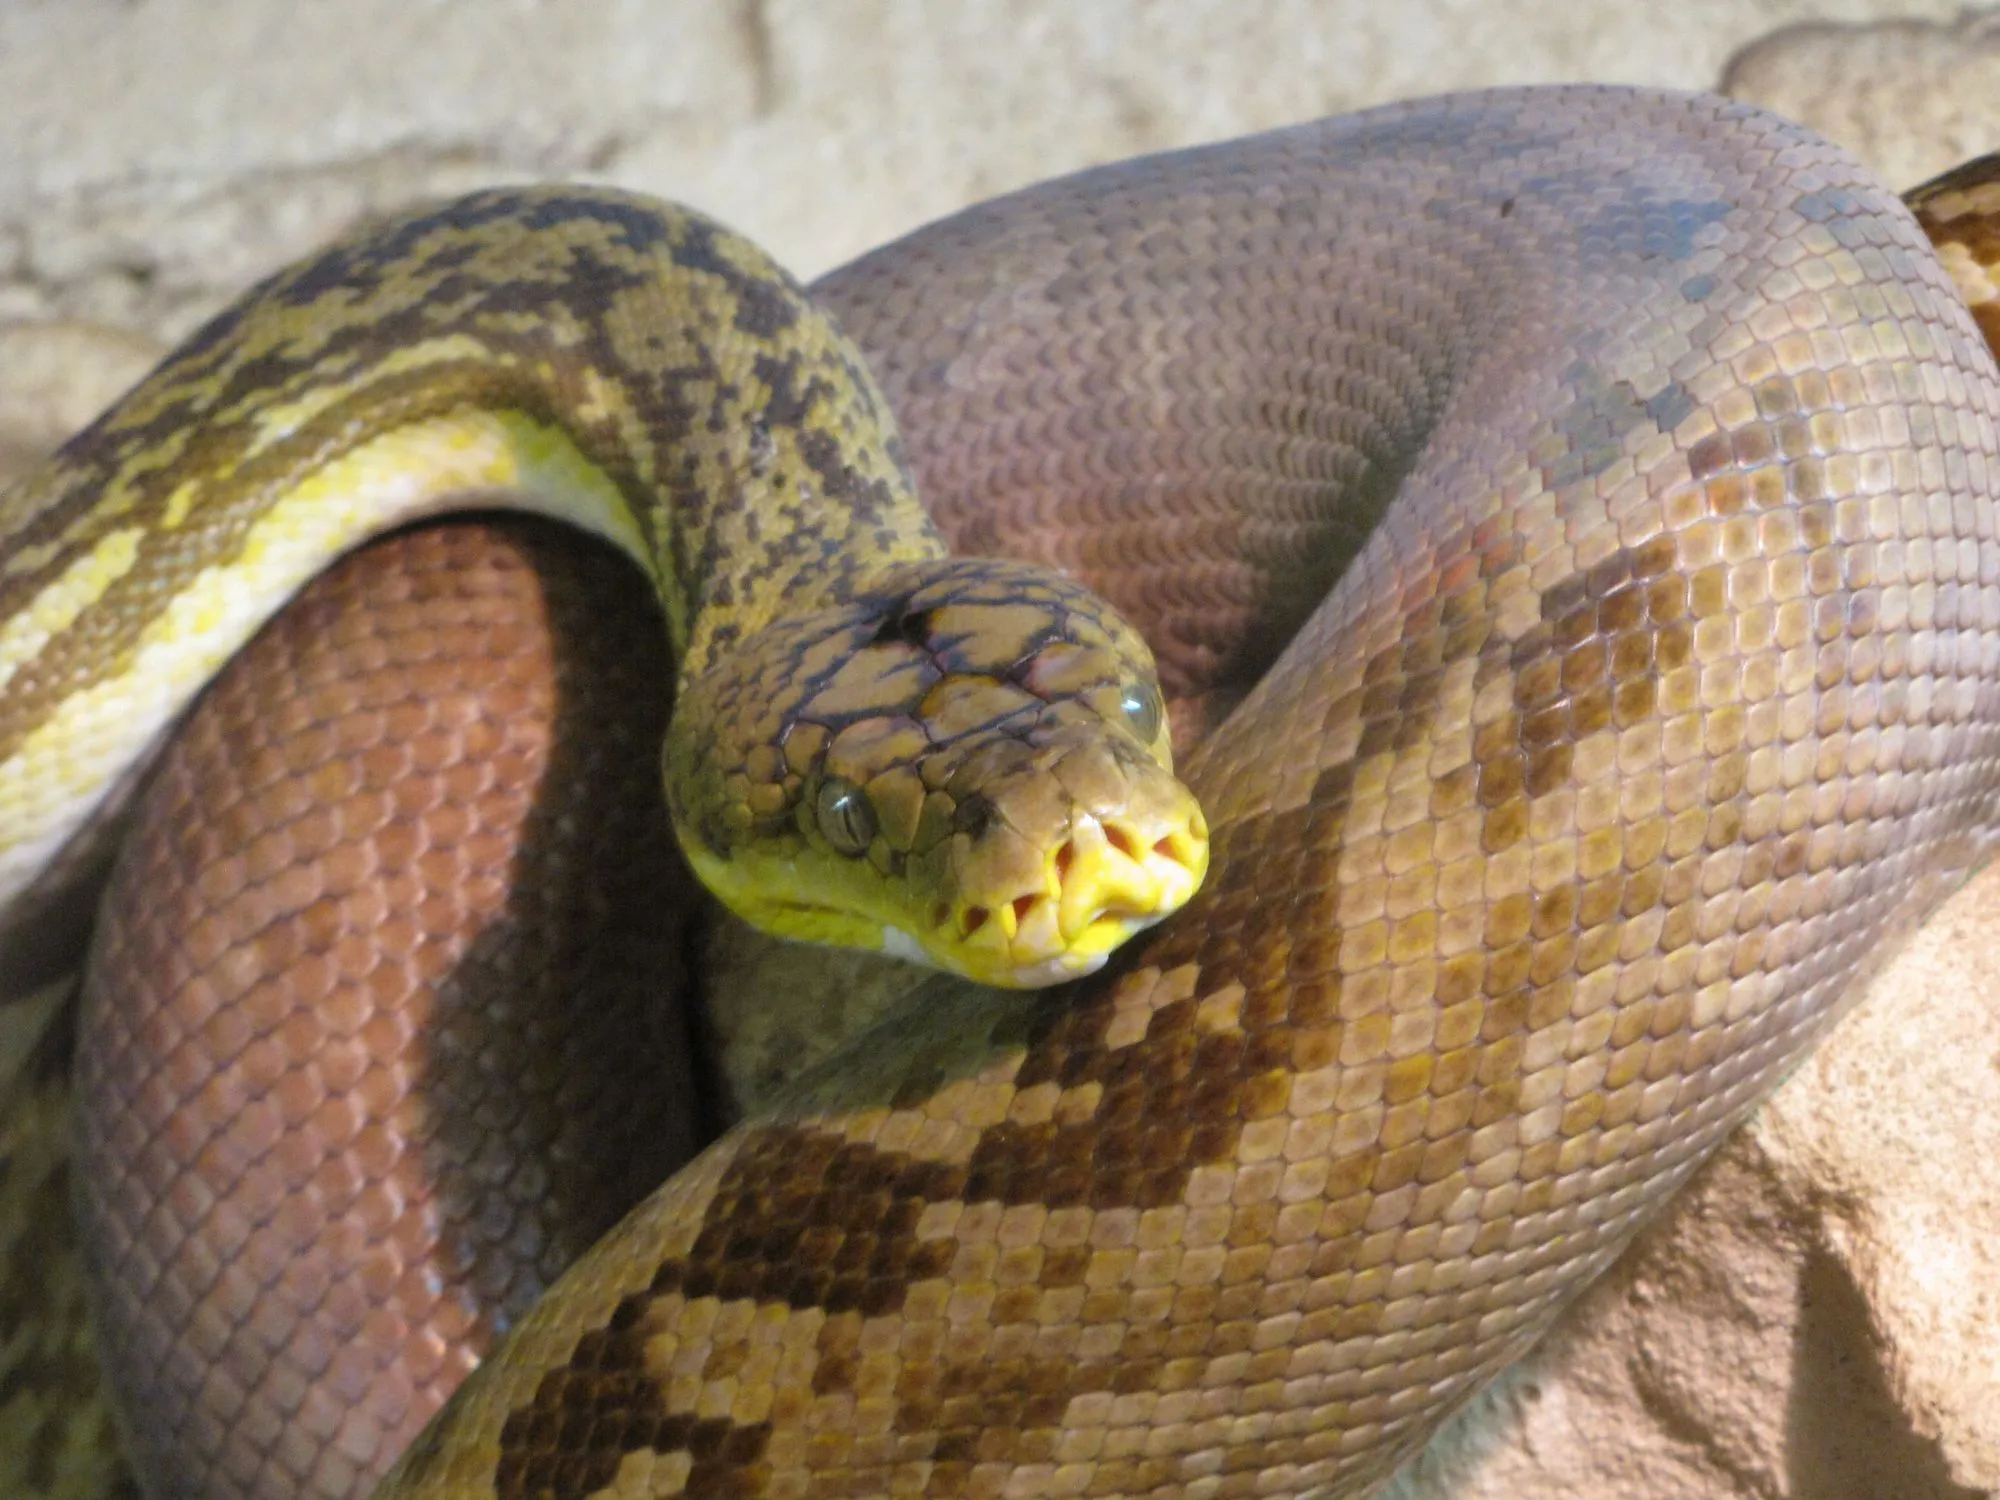 The Timor python is comparatively thin and has an approximate length of 83 in (210.8 cm)